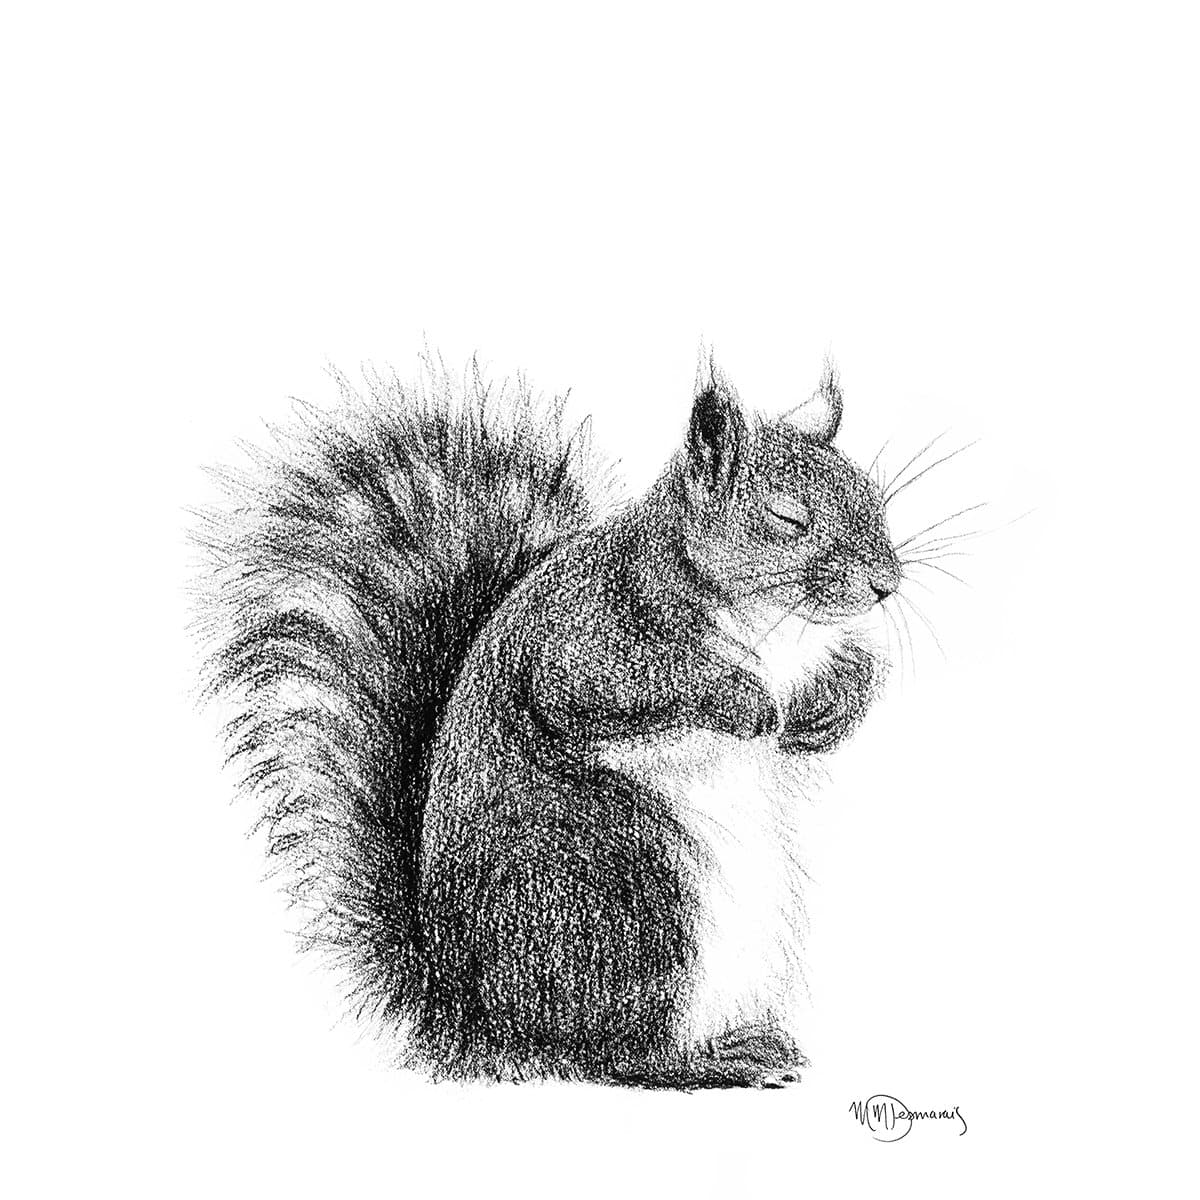 Sleeping Squirrel illustration - "Social Animal" Collection - LE NID atelier